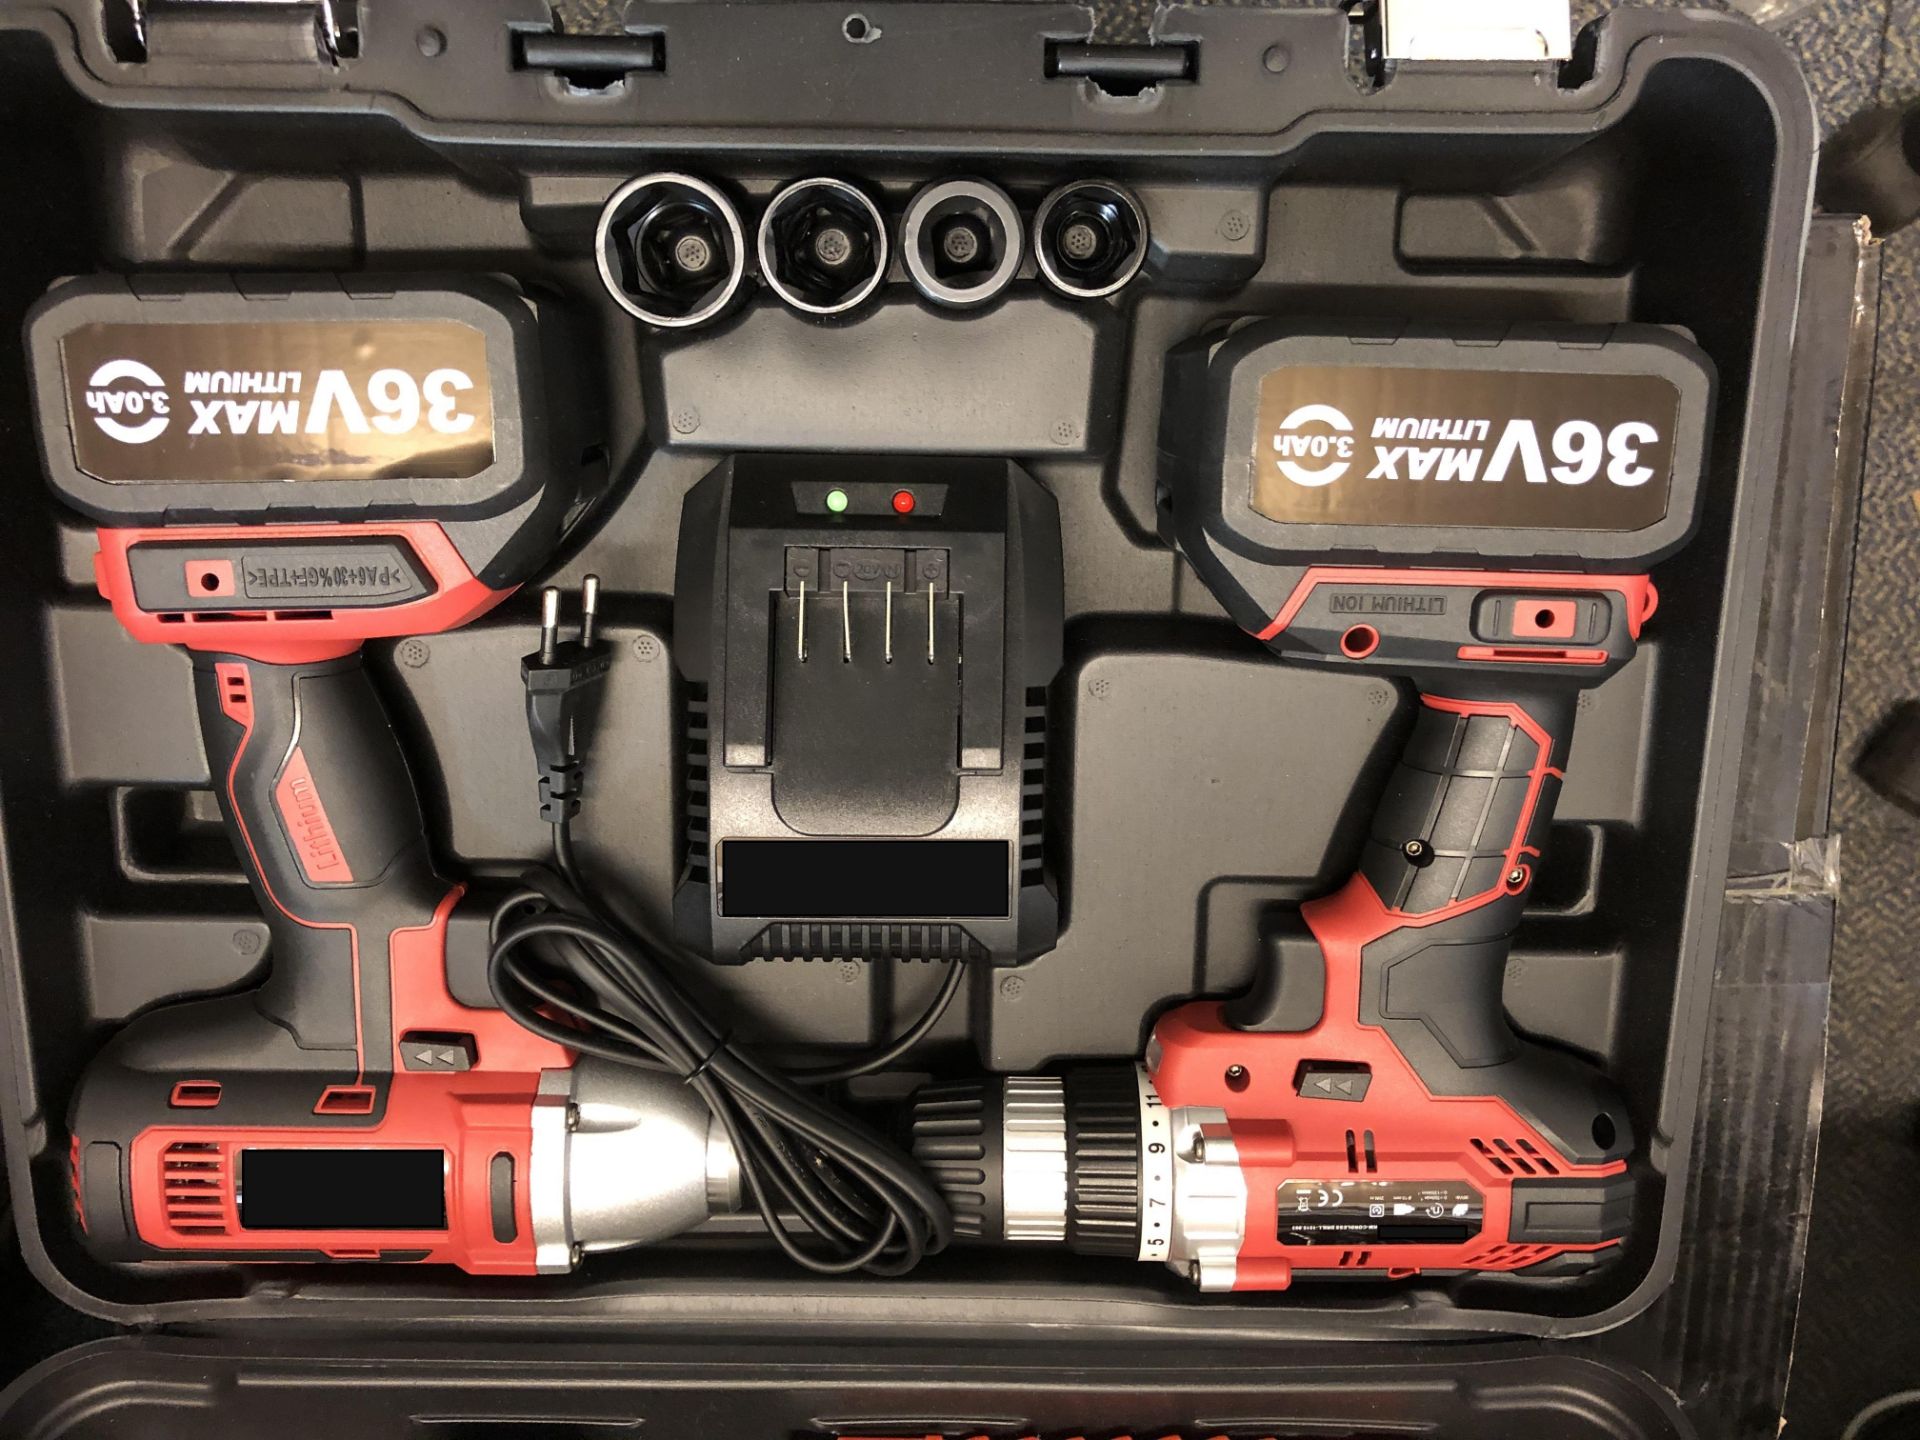 V Brand New 36V Twin Pack Cordless Drill/Driver And Cordless Impact Driver - 1 Hour Charge - 3.0Ah - Image 3 of 3